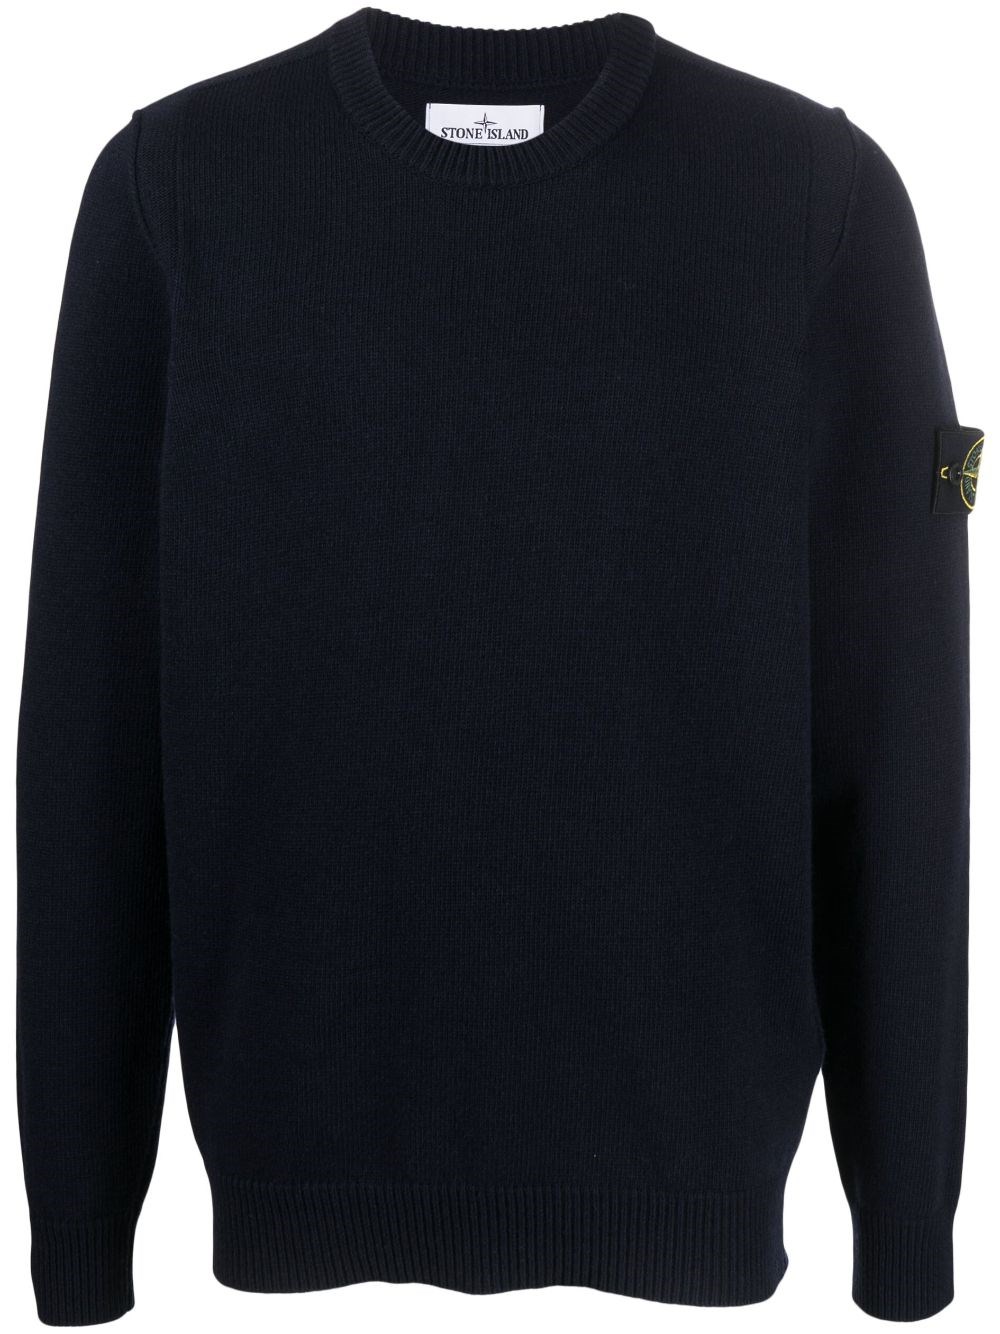 stone island PULLOVER available on montiboutique.com - 56282